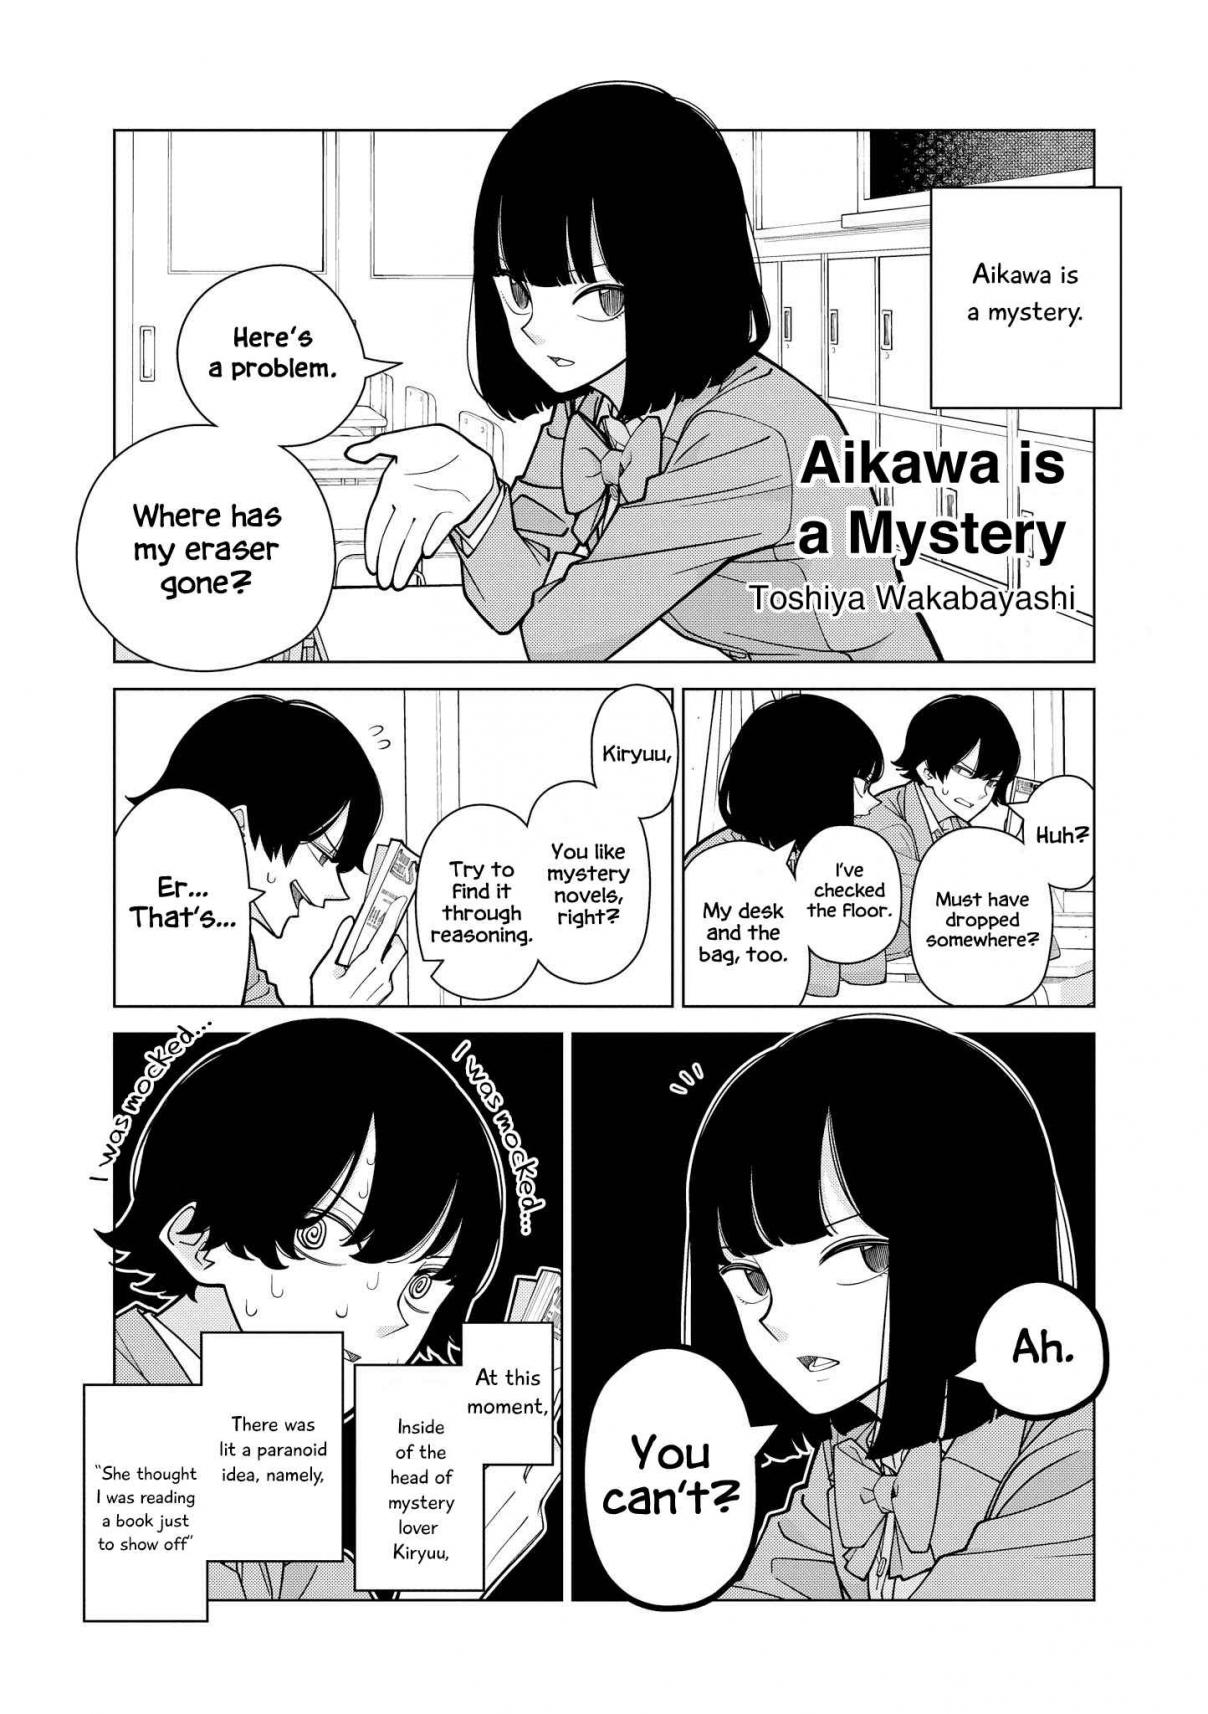 “It’s too precious and hard to read !!” 4P Short Stories Vol. 1 Ch. 8 Aikawa is a mystery [by Toshiya Wakabayashi]